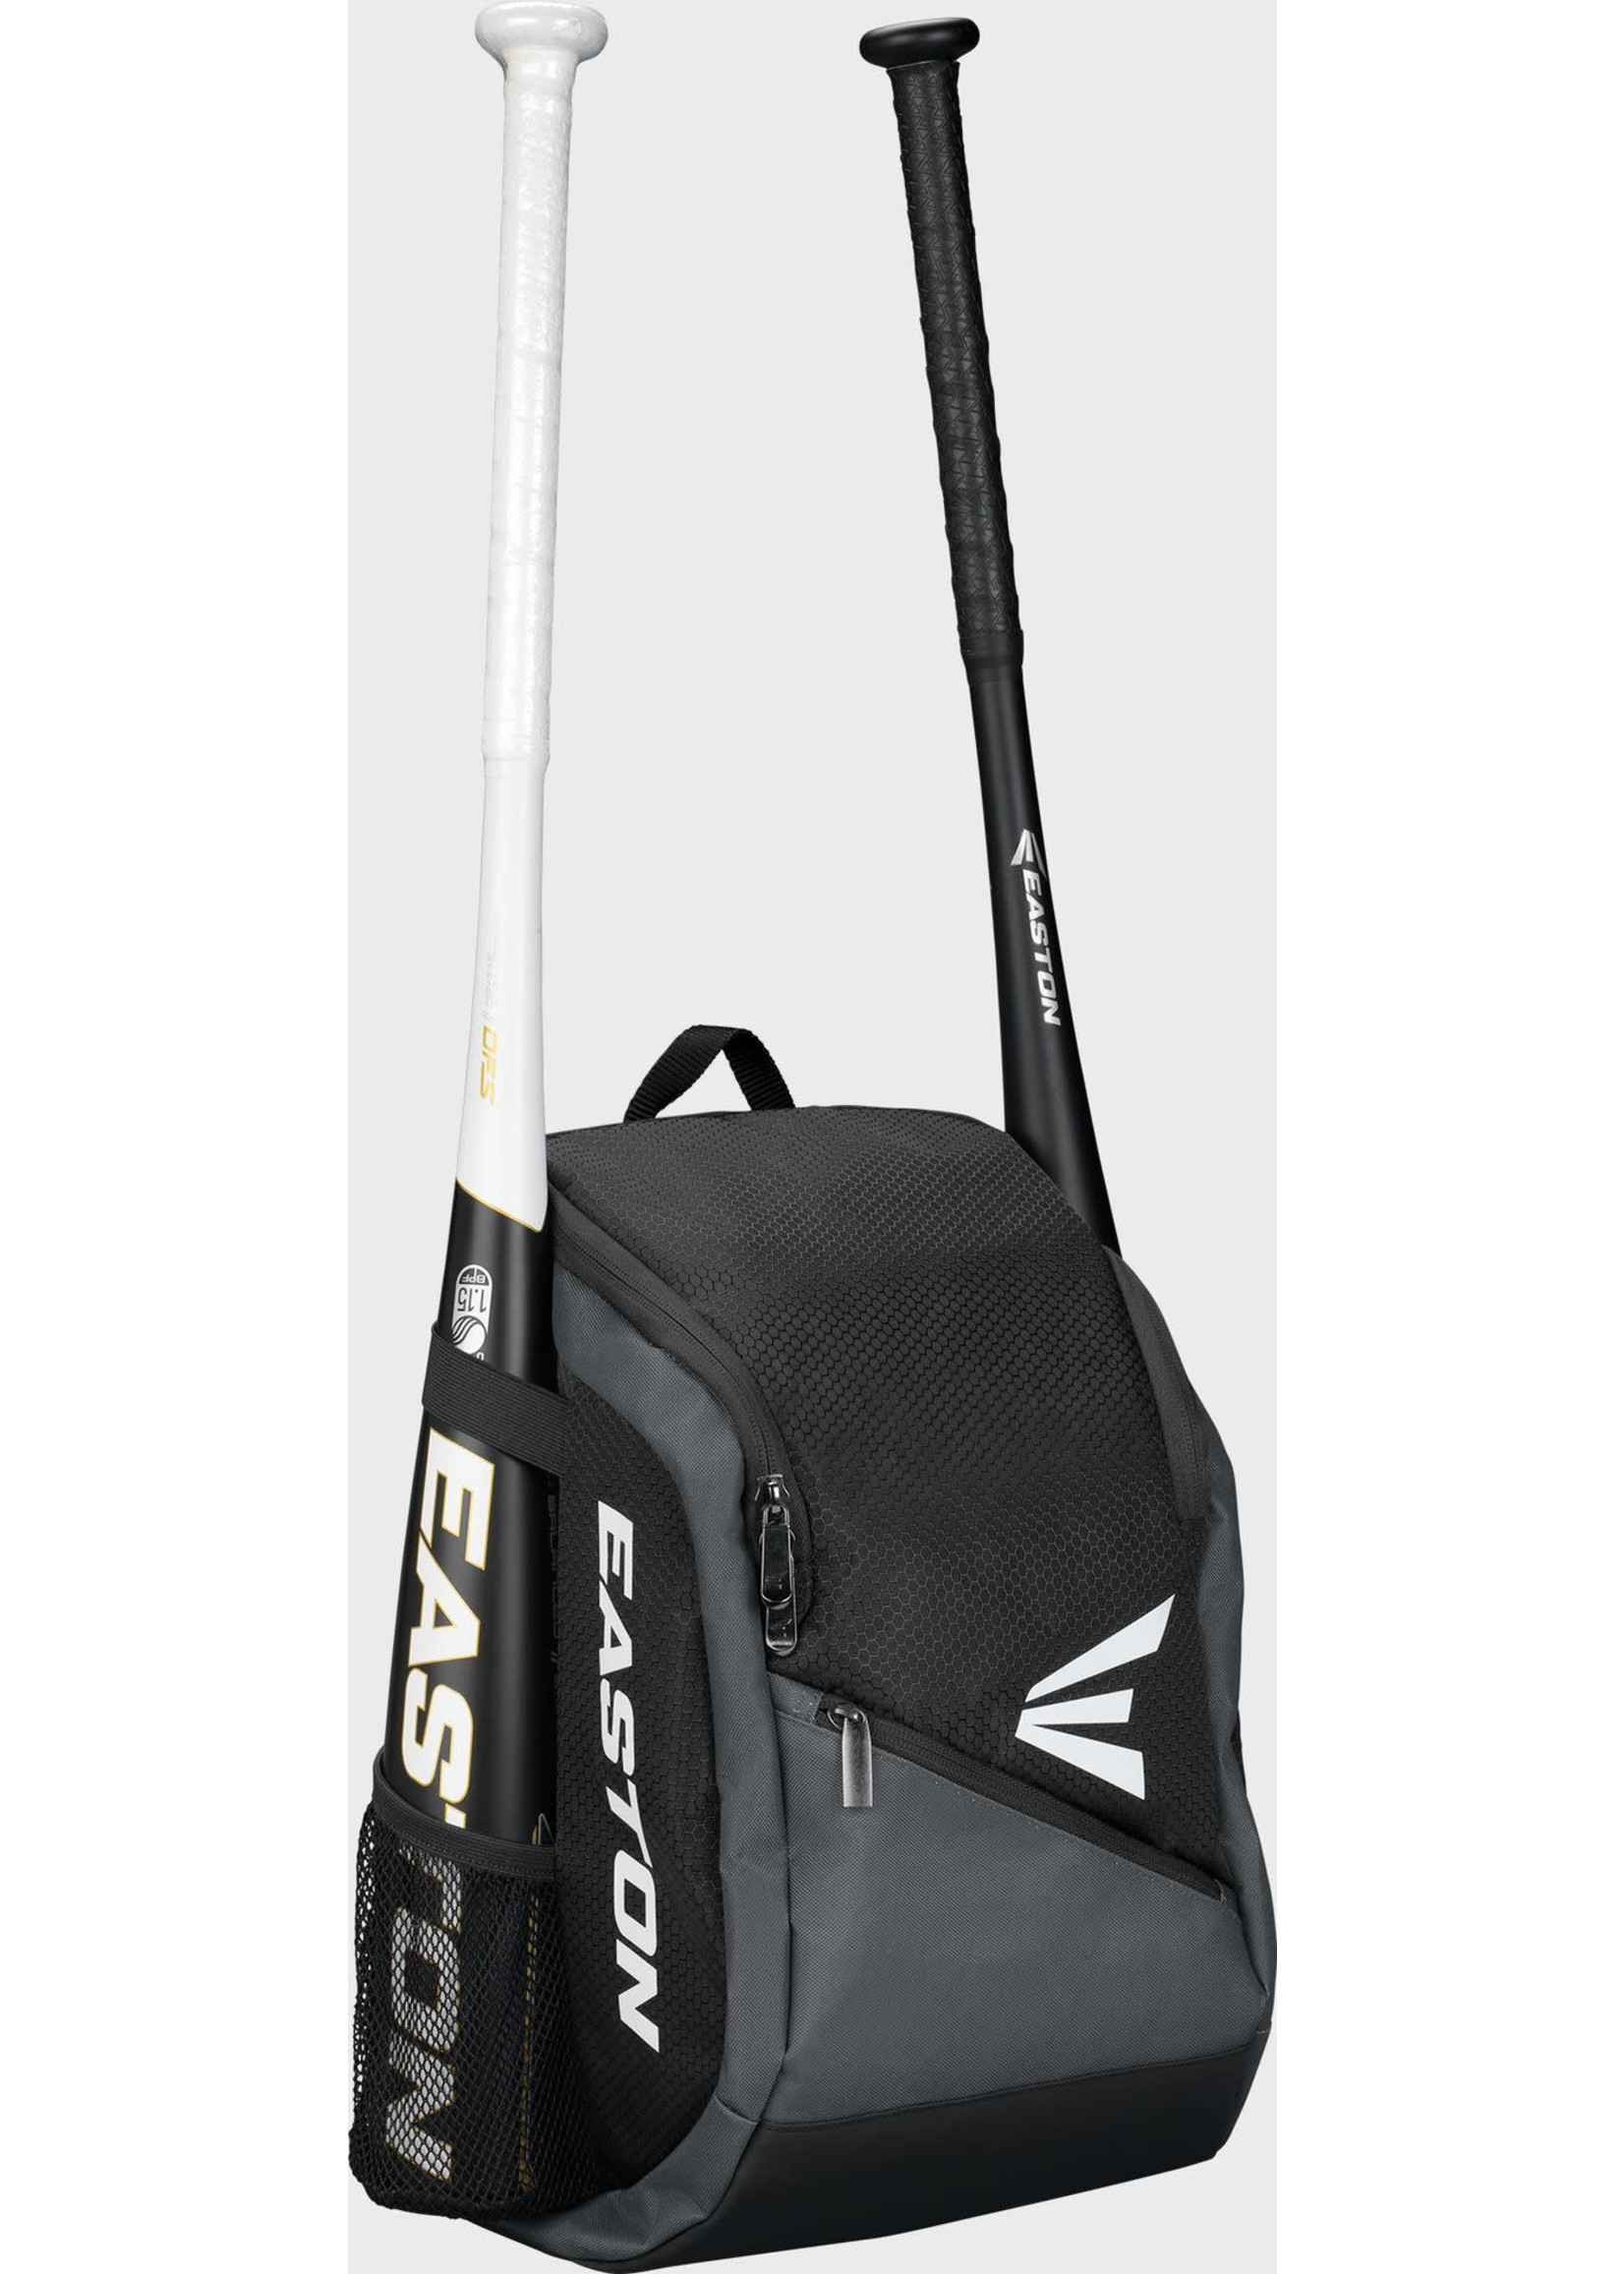 EASTON EASTON GAME READY BACKPACK YOUTH 16"H x  12"x  Wx 8"D